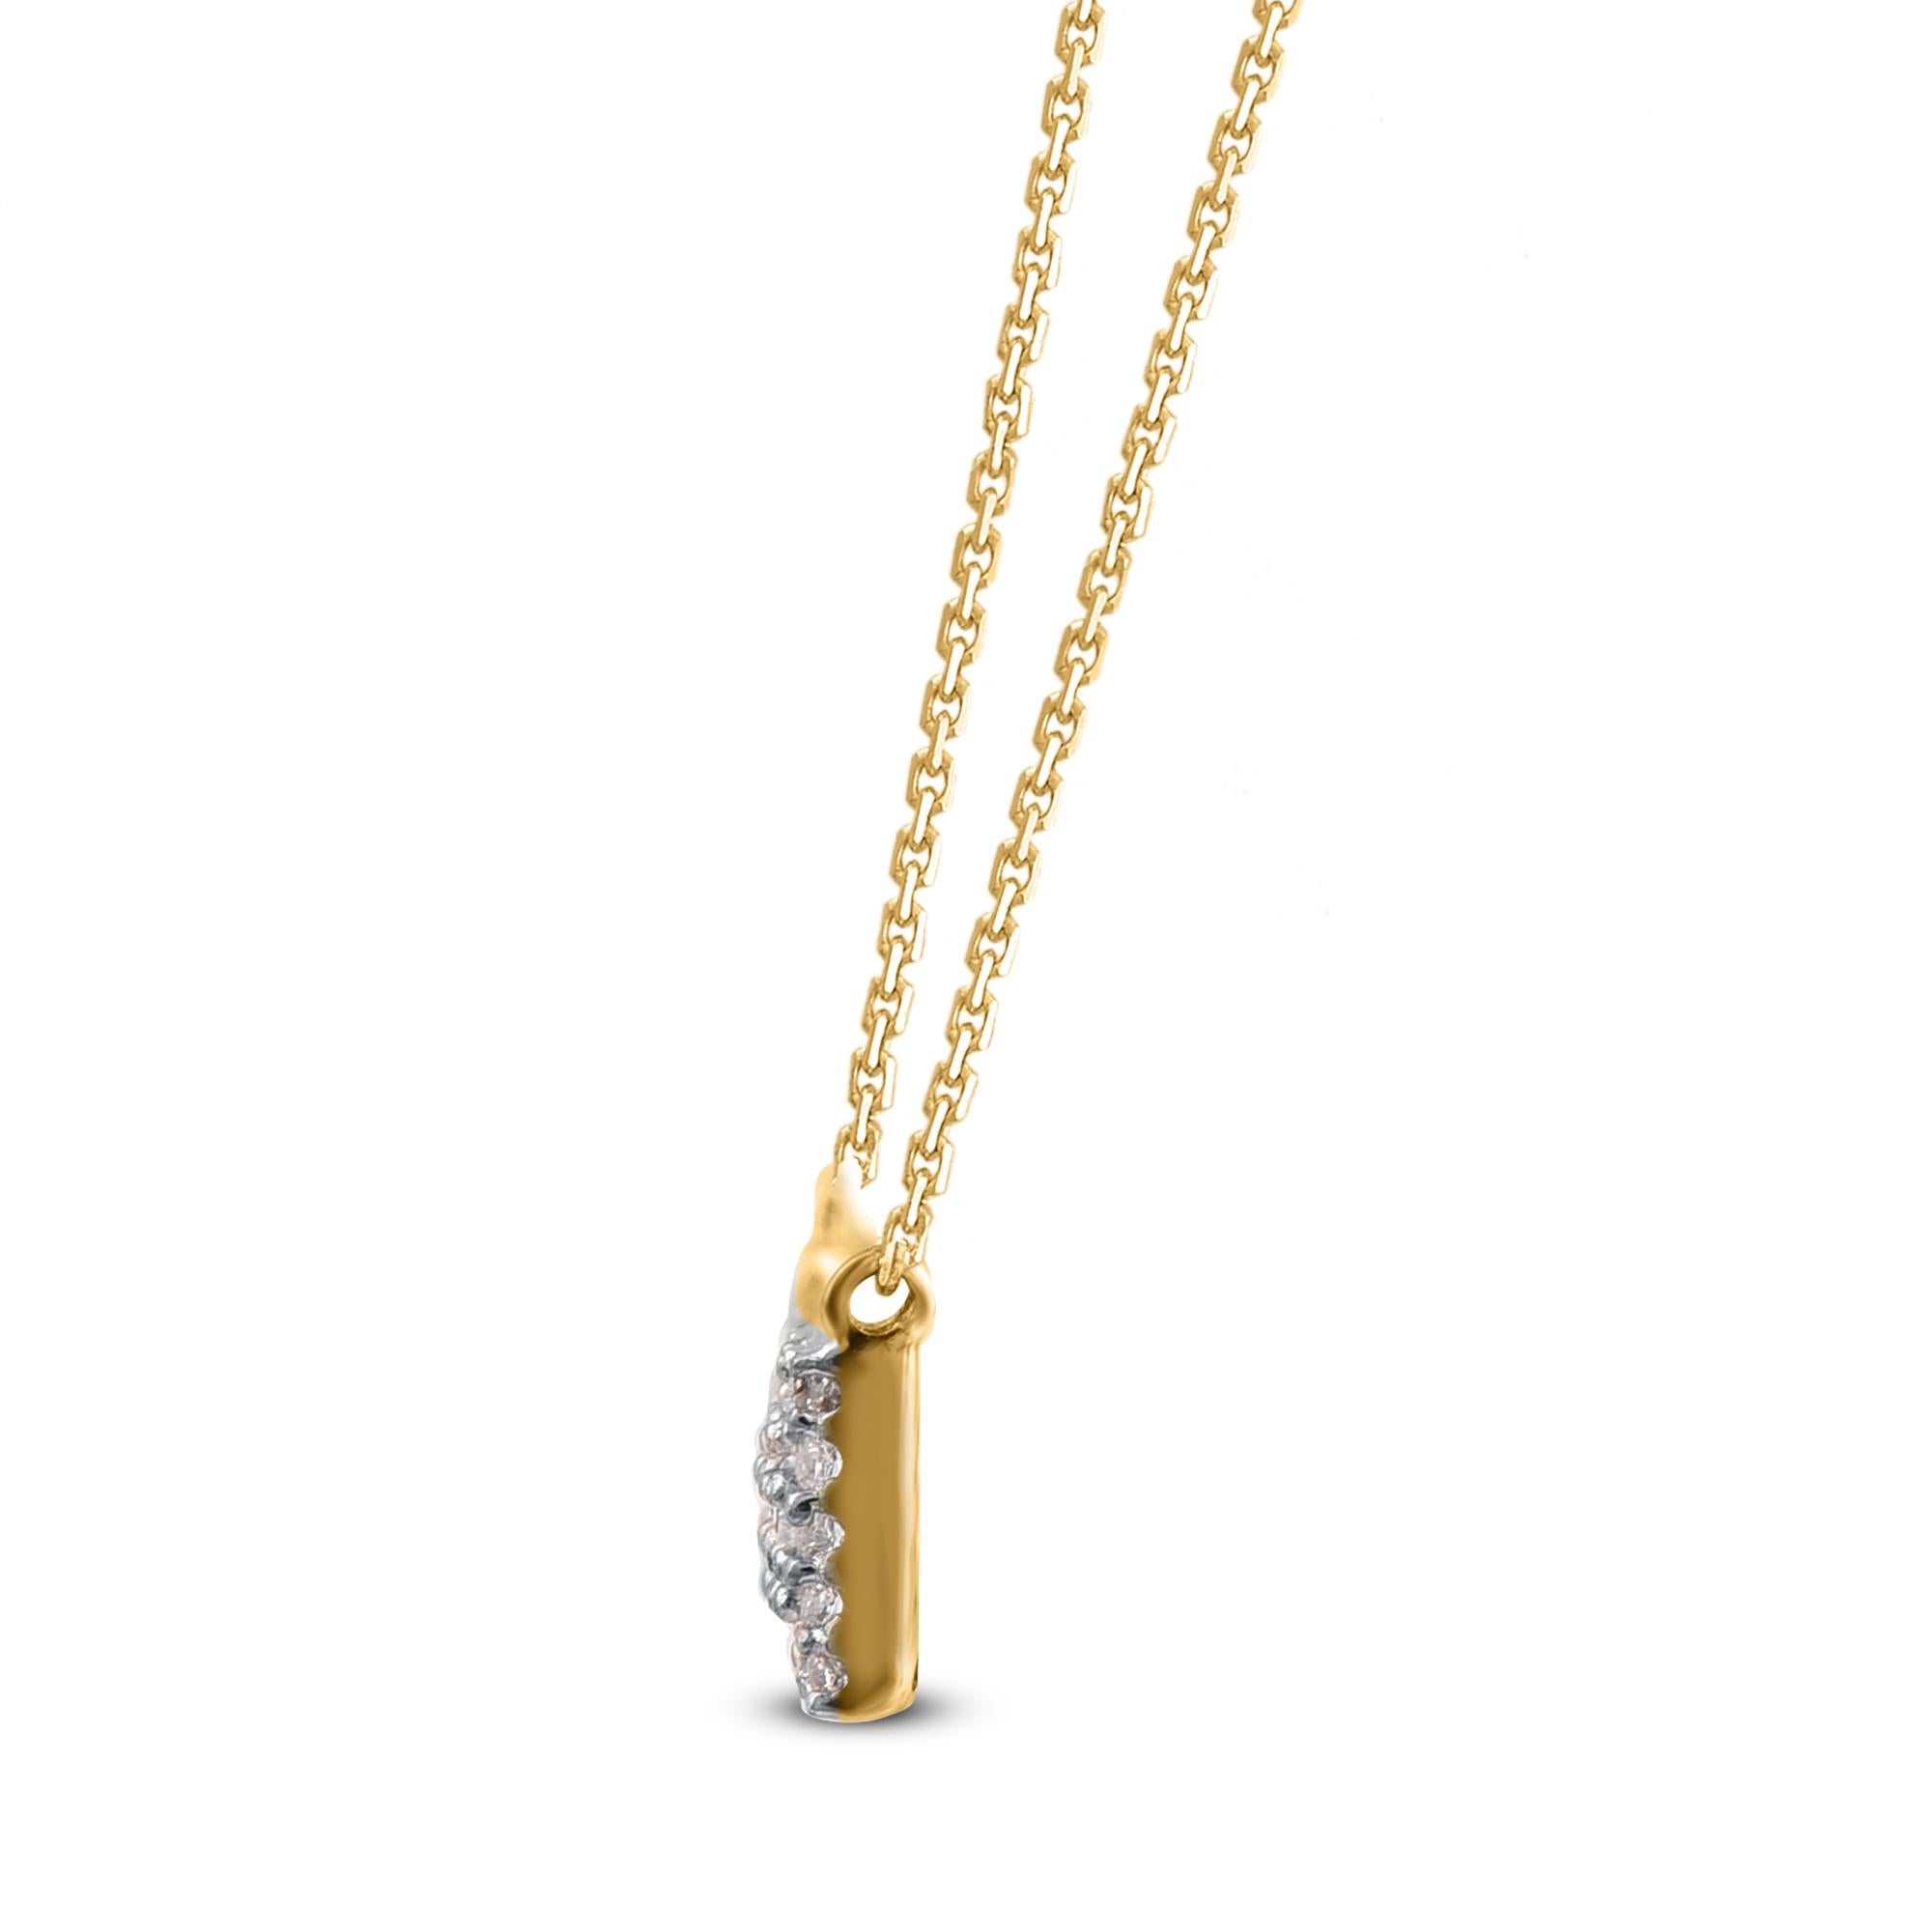 Chic and shimmering, necklace created in 14K yellow gold, this horizontal bar pendant features 74 channel-set baguette-cut diamonds bordered in round diamonds. Diamonds are graded as H-I color and I-2 clarity. Necklace suspends along an cable chain